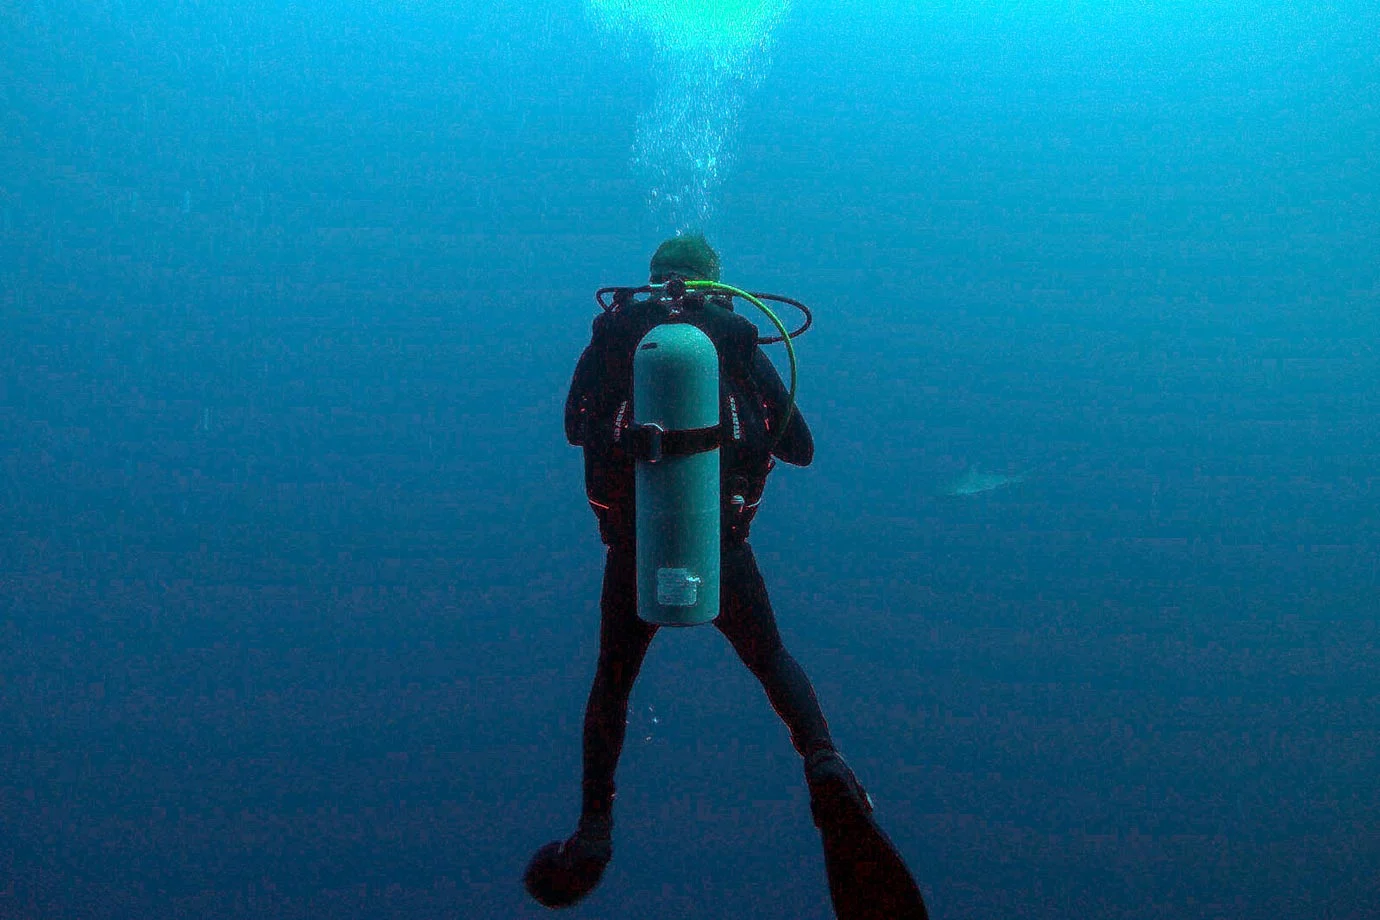 Diving enthusiasts flock to the Blue Hole